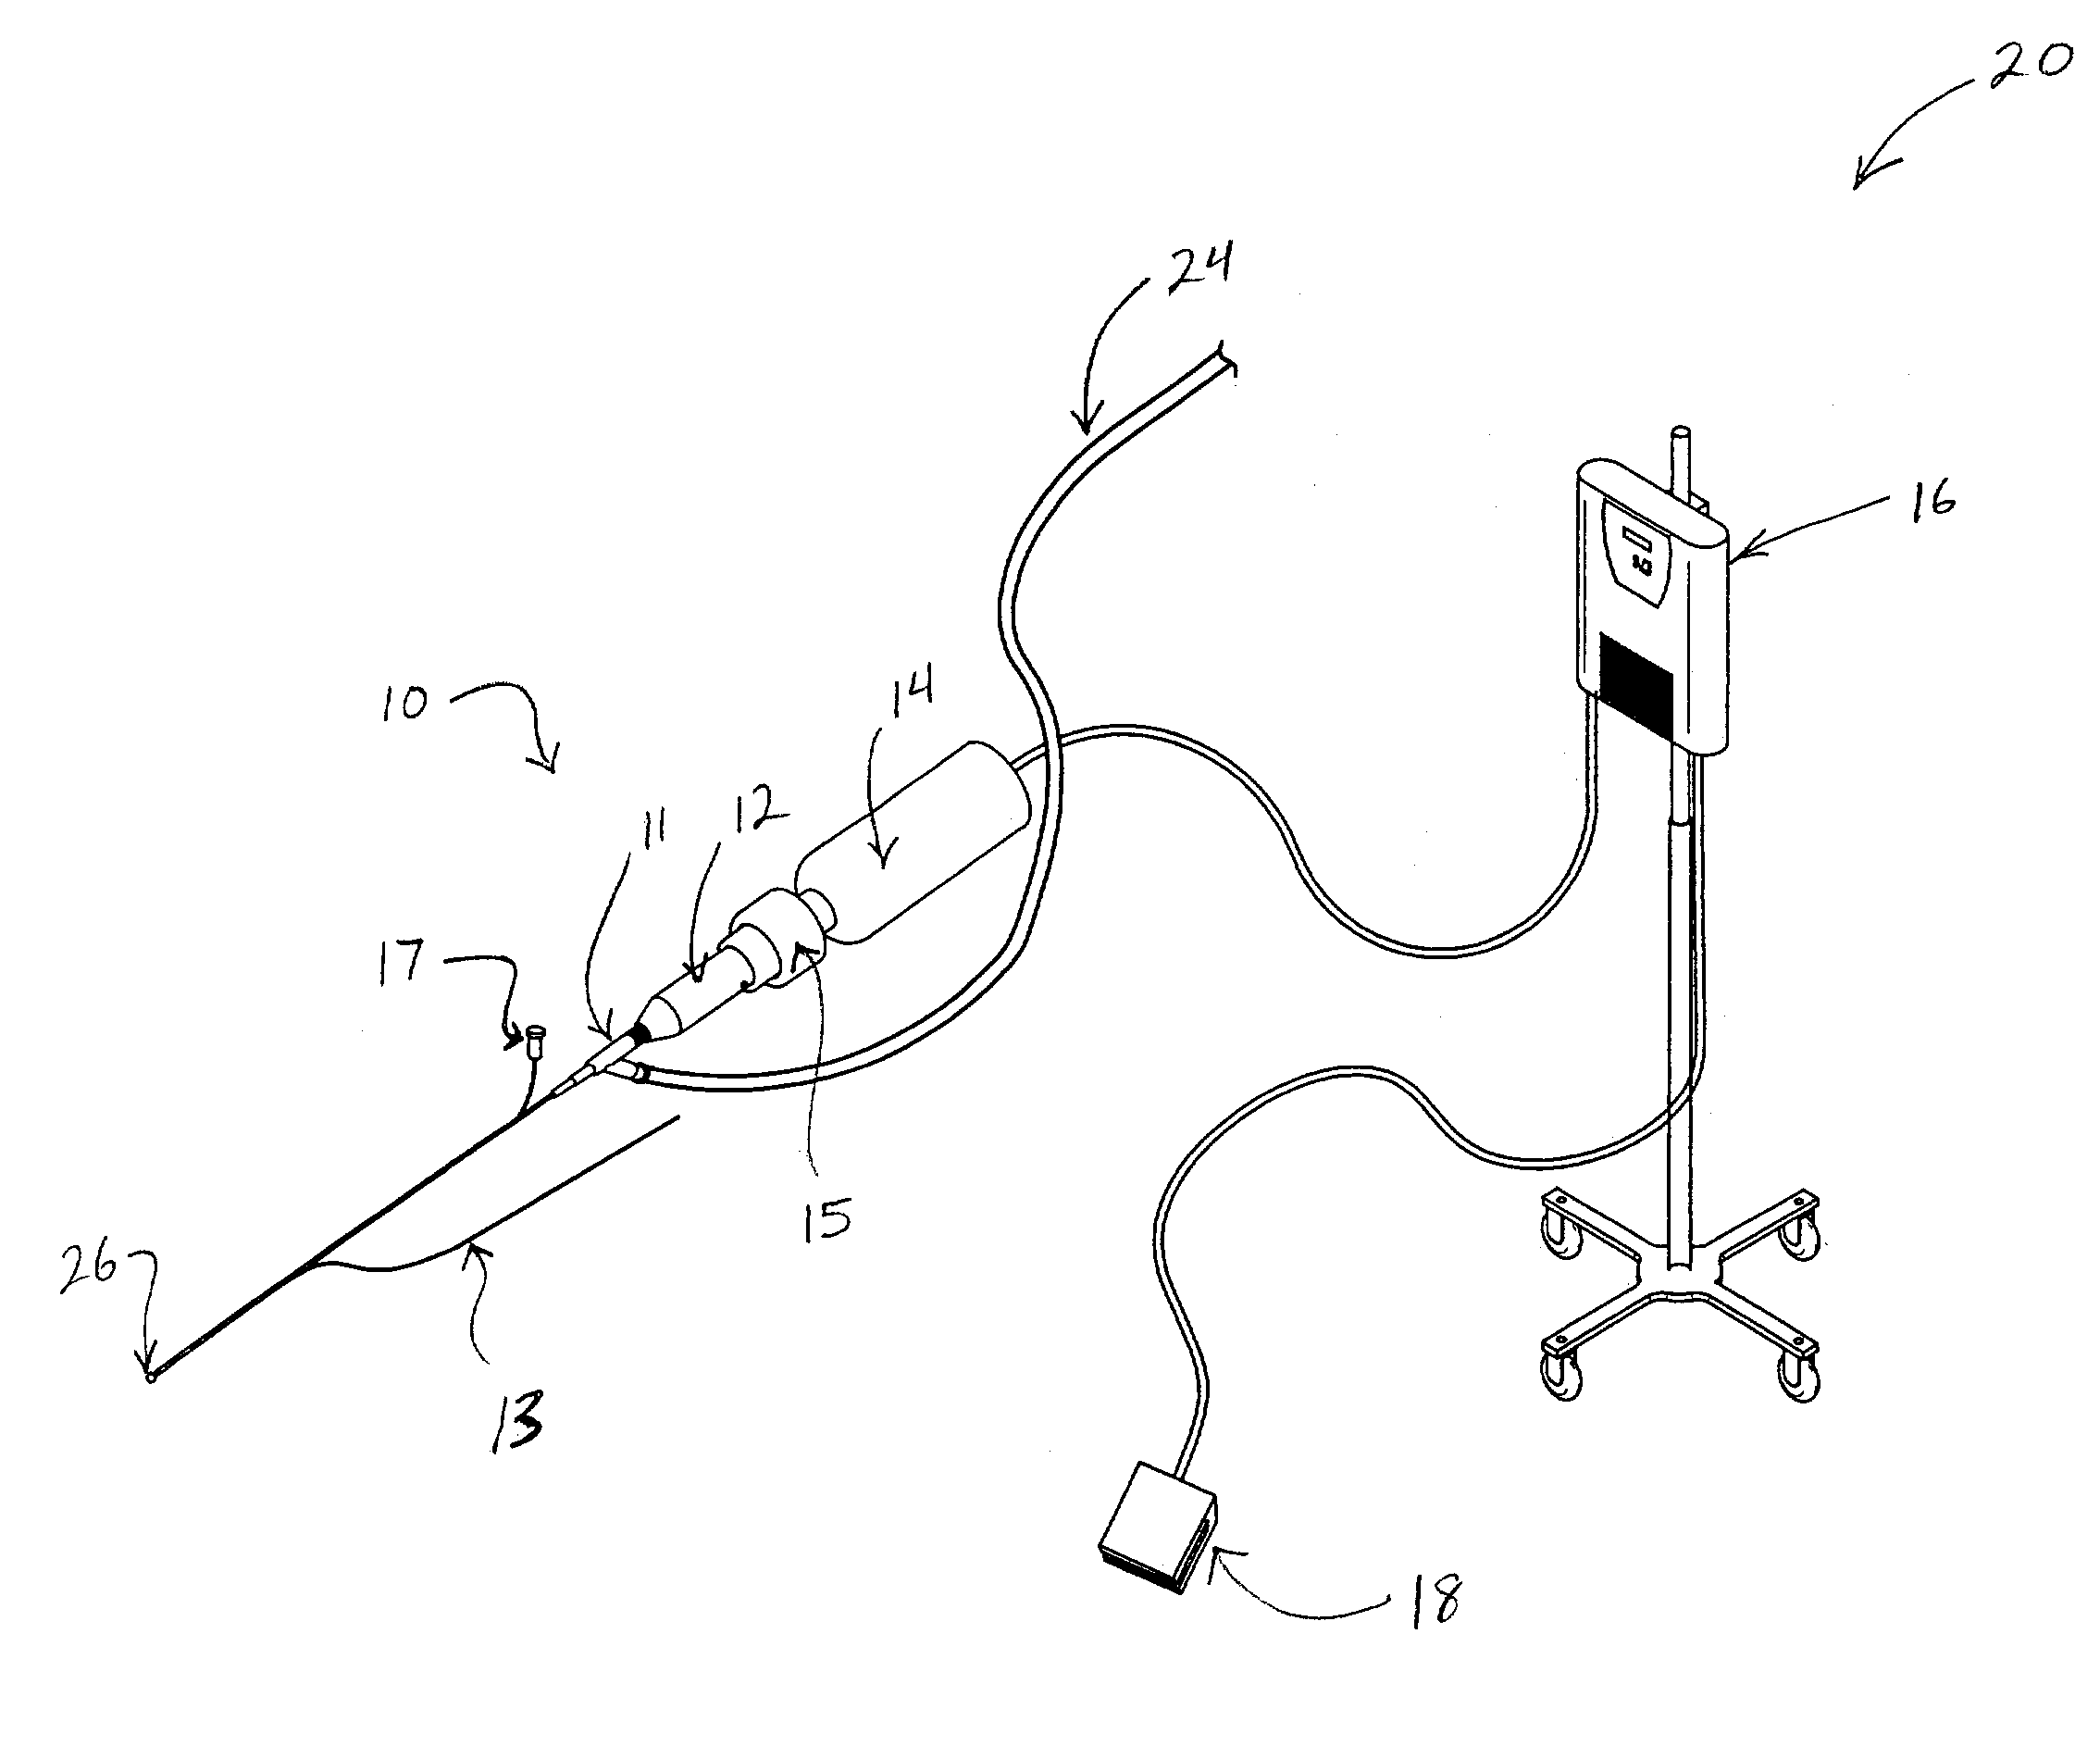 Ultrasound catheter devices and methods